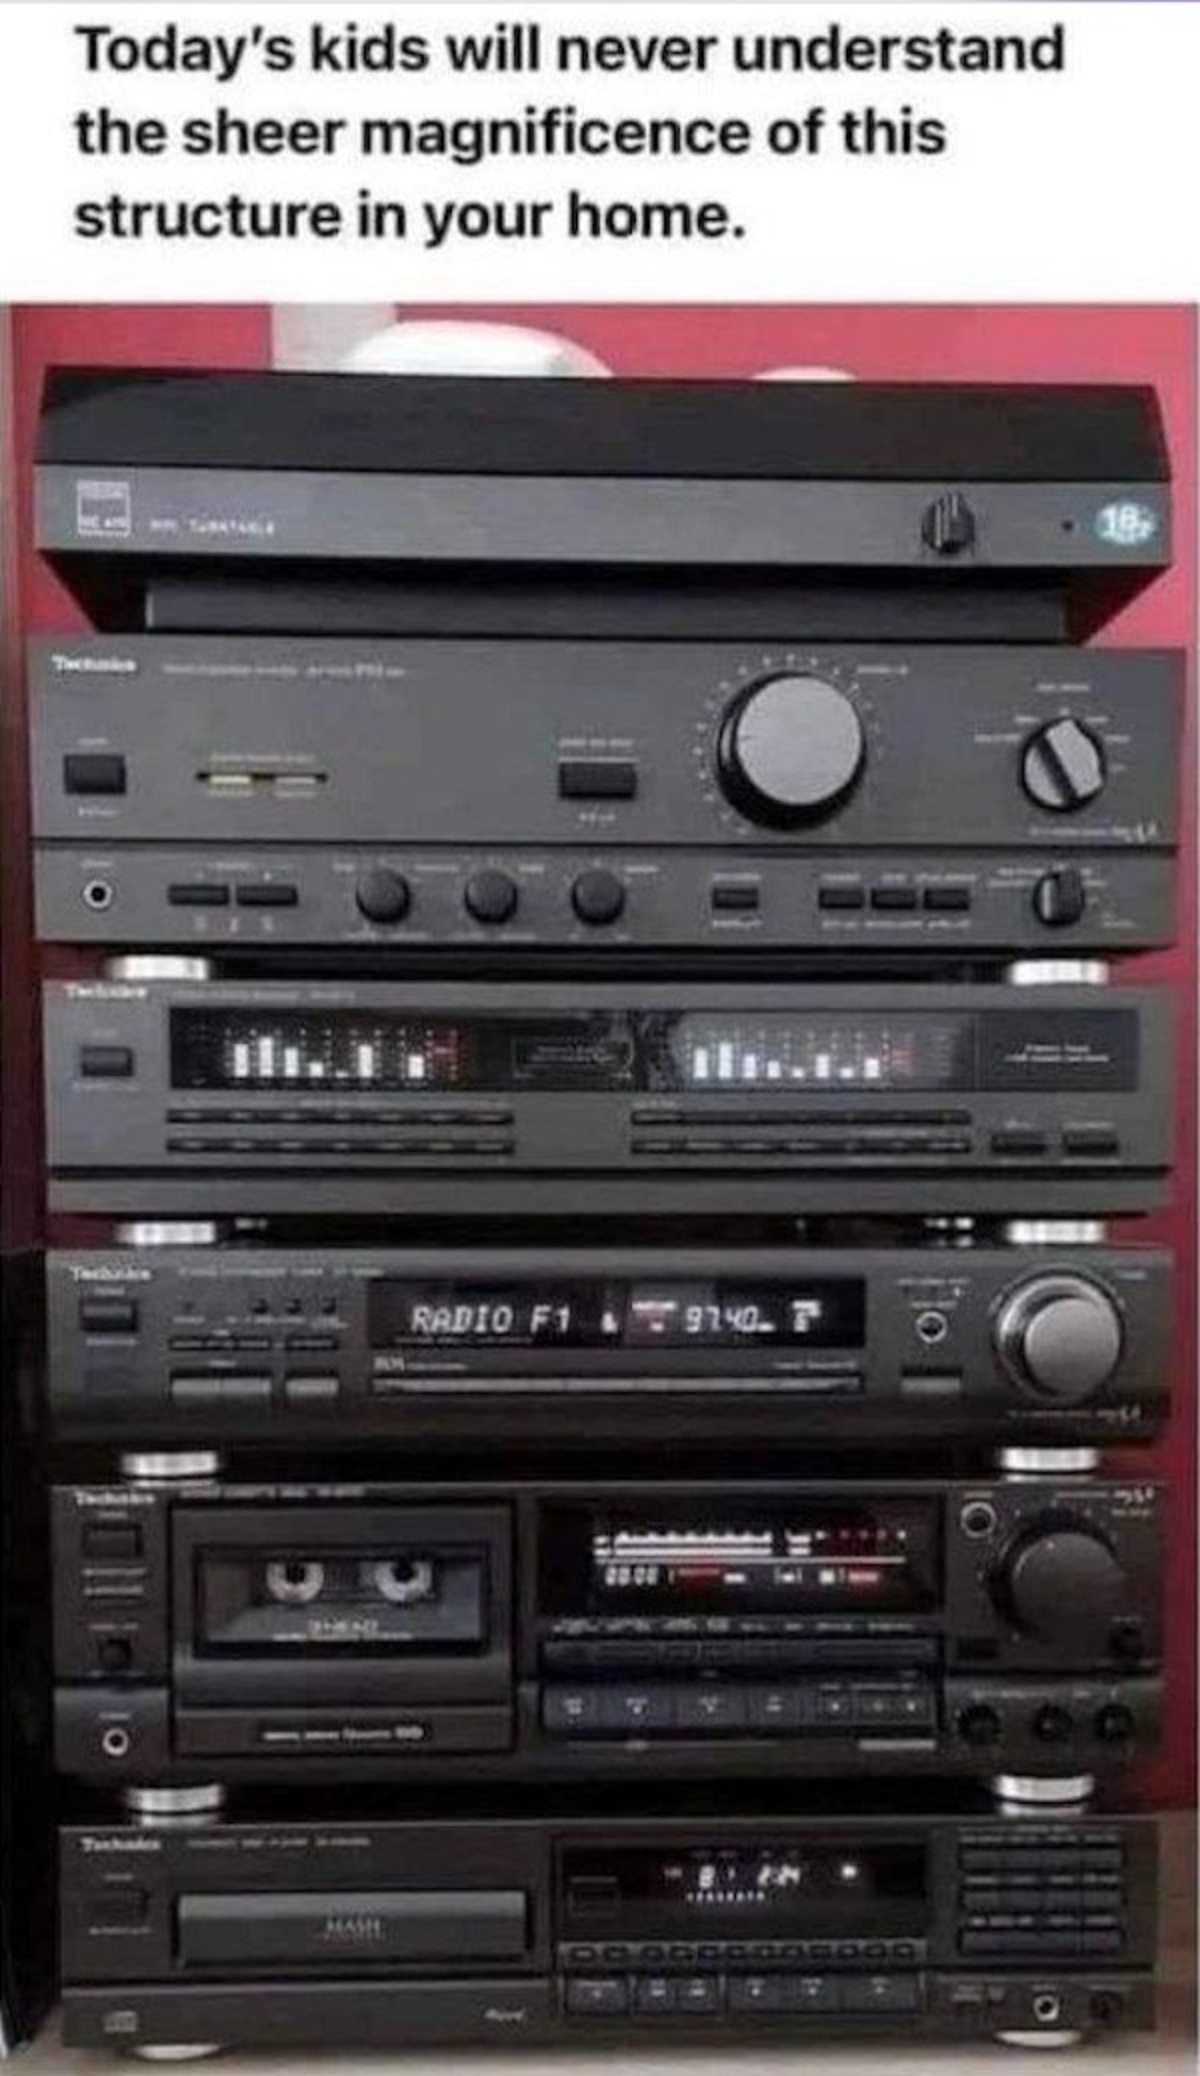 technics component stereo system - Today's kids will never understand the sheer magnificence of this structure in your home. Terbakre Radio F1 97407 Tashaks 18 o 0